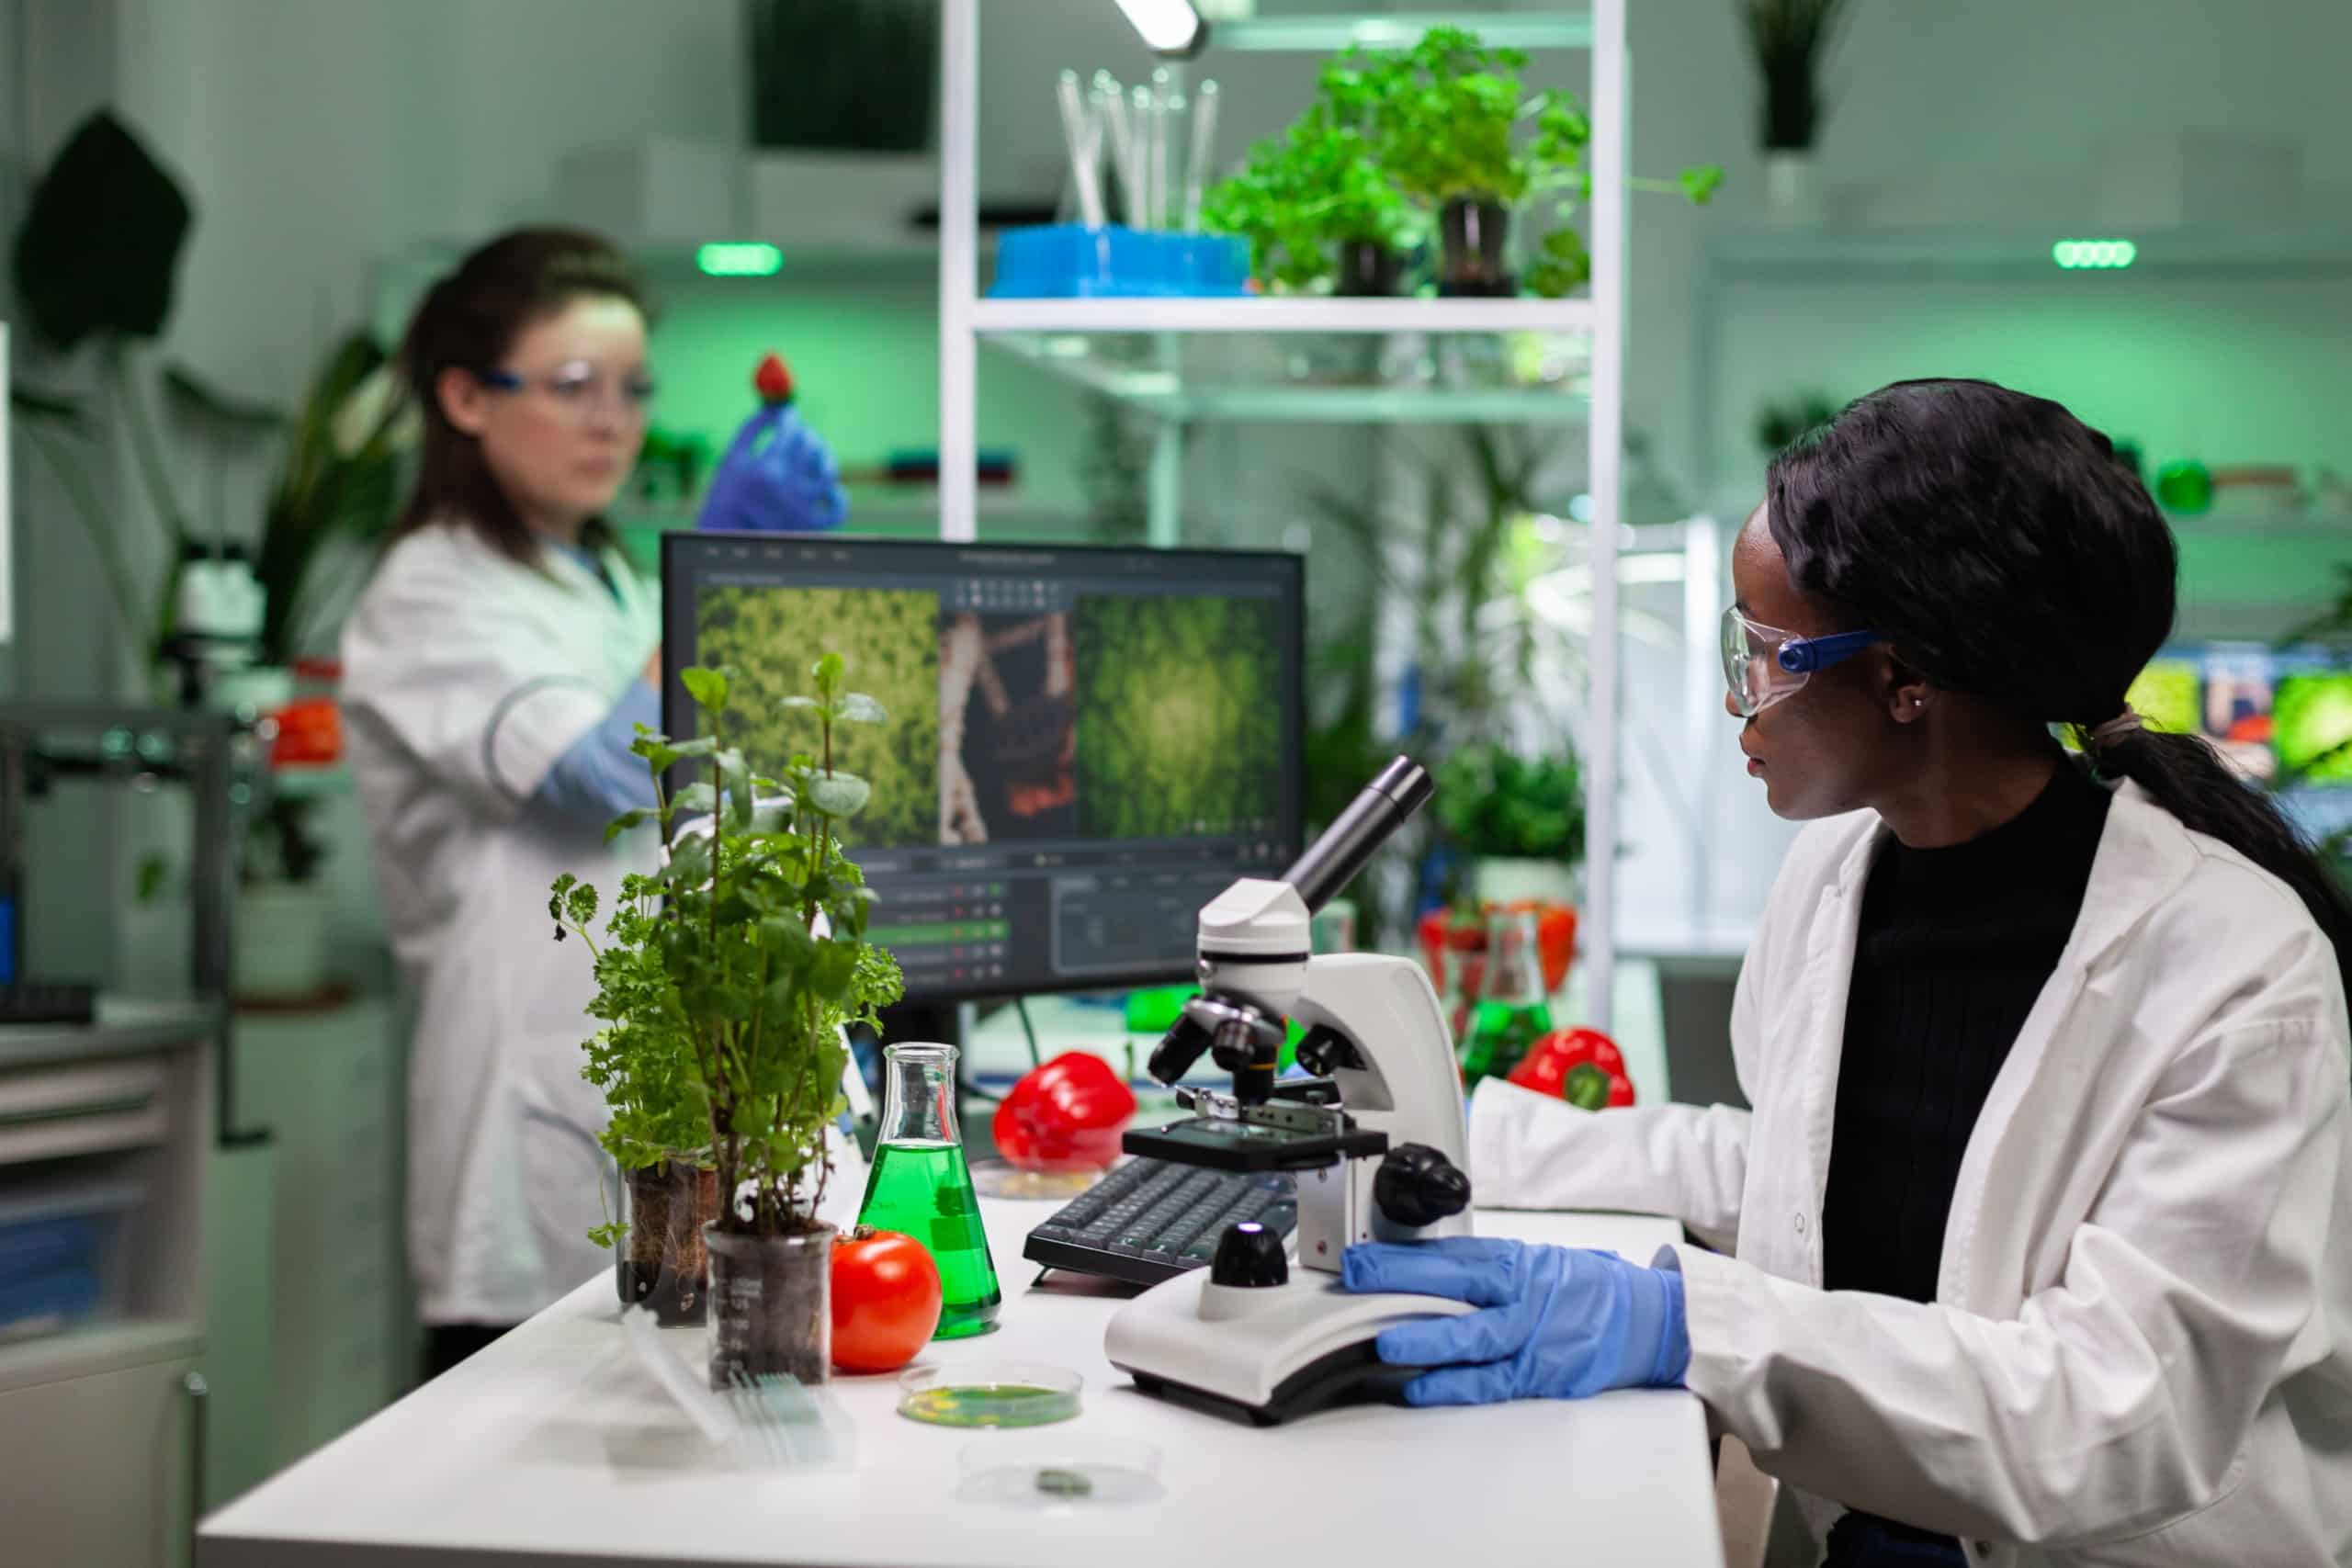 Woman in lab coat seated at a lab table with a computer monitor and microscope, and on the table plants, beakers and vegetables